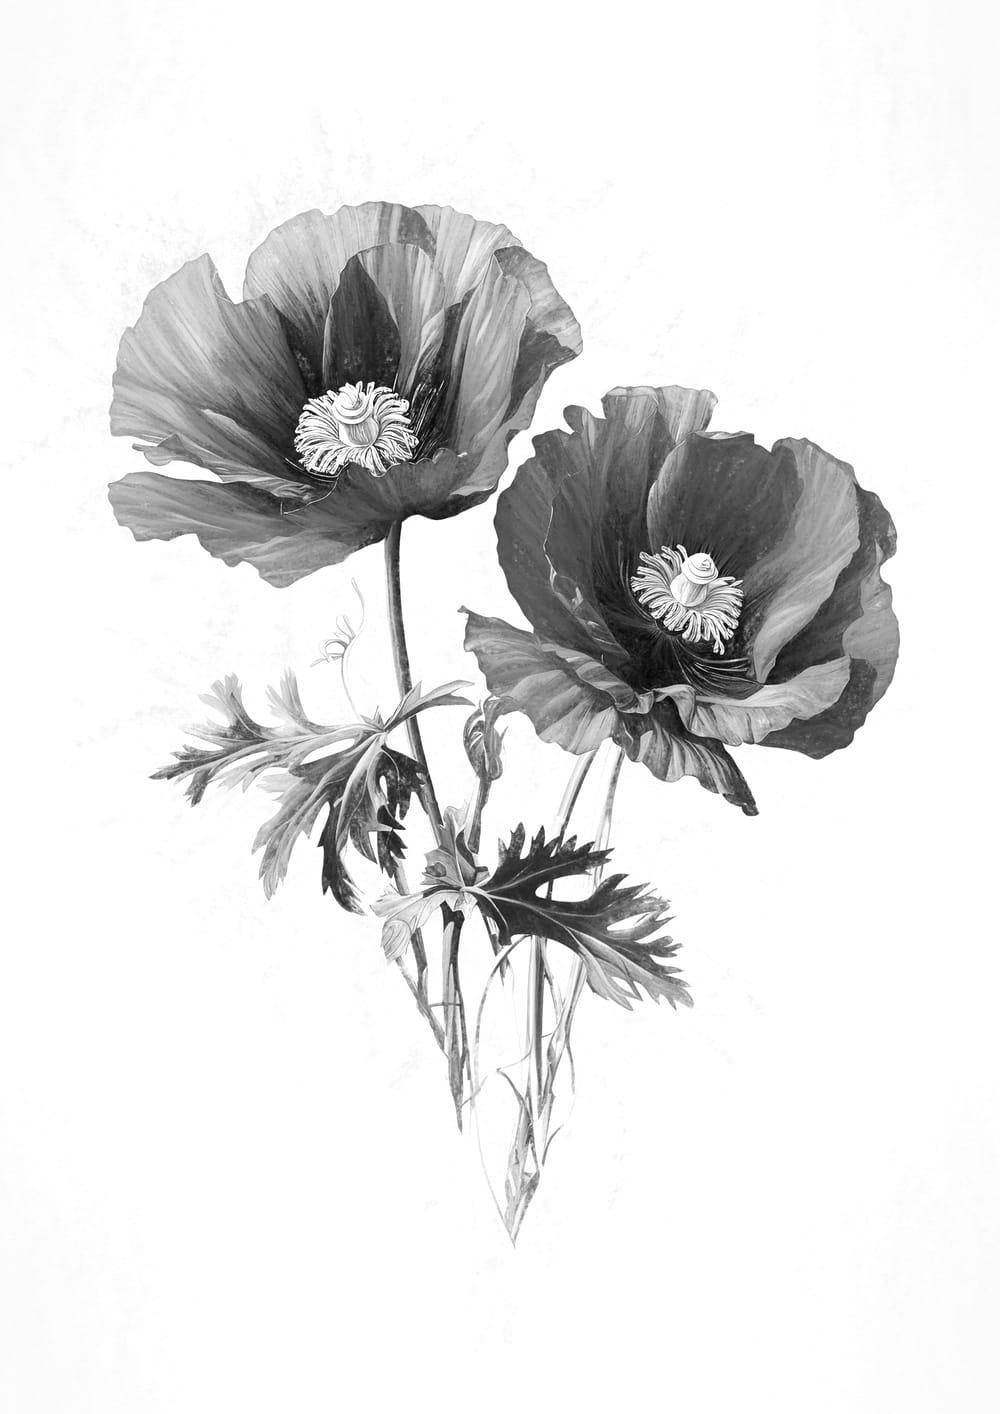 Two Poppies